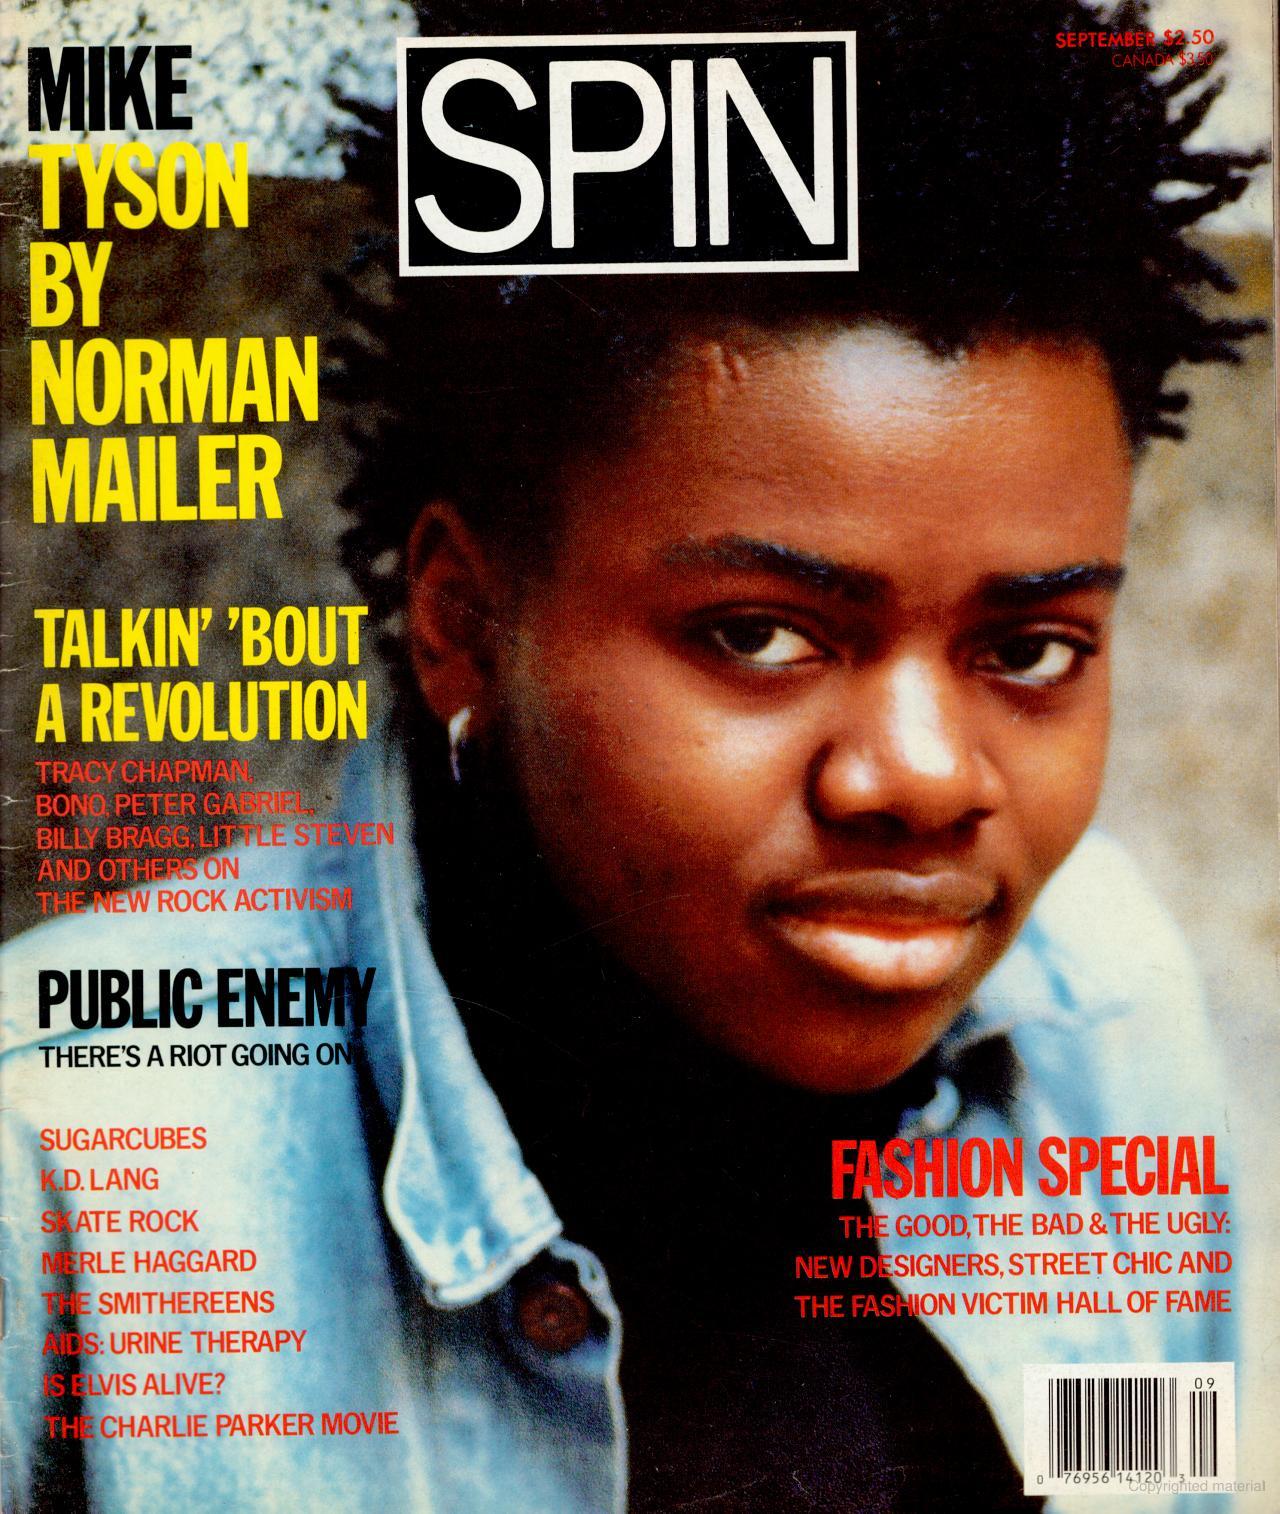 Lauryn Hill: Our 1998 Artist of the Year